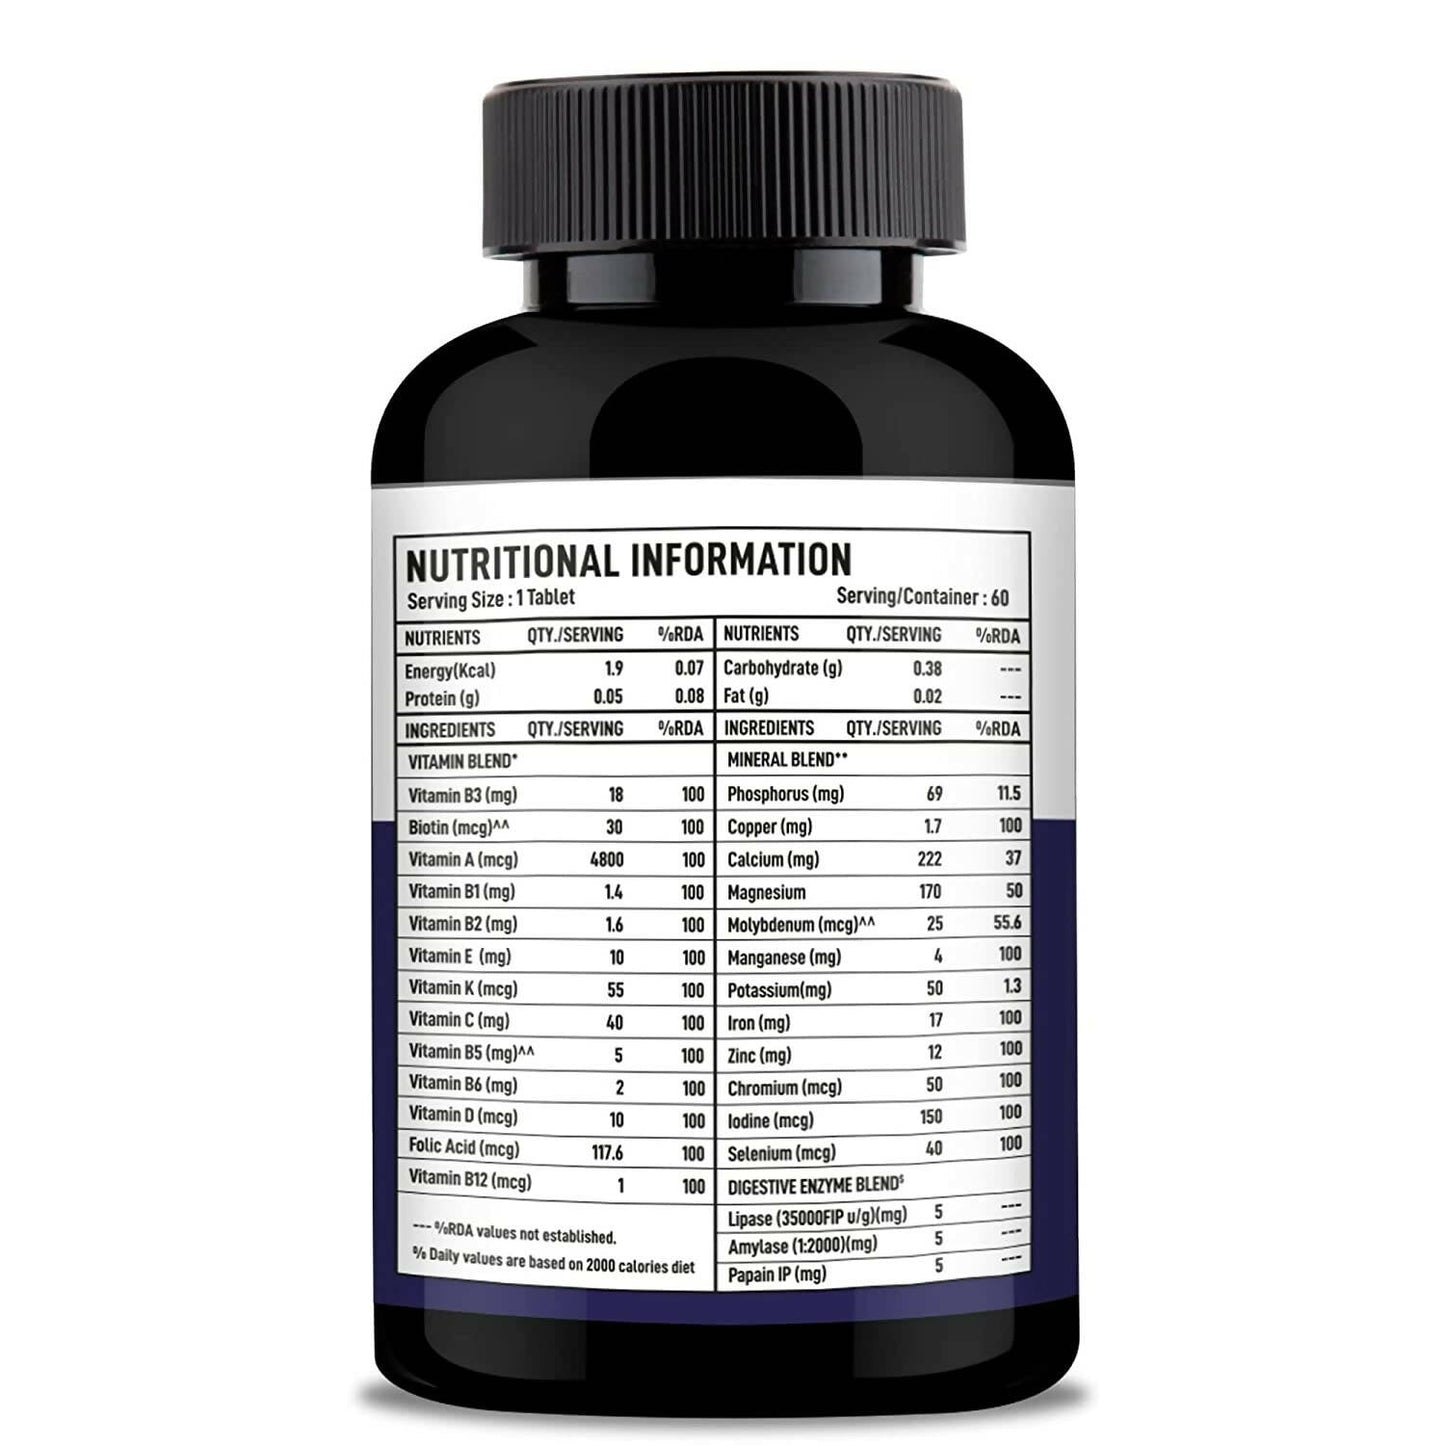 Nutracology Multivitamin for Men for Energy Strength & Stamina Tablets